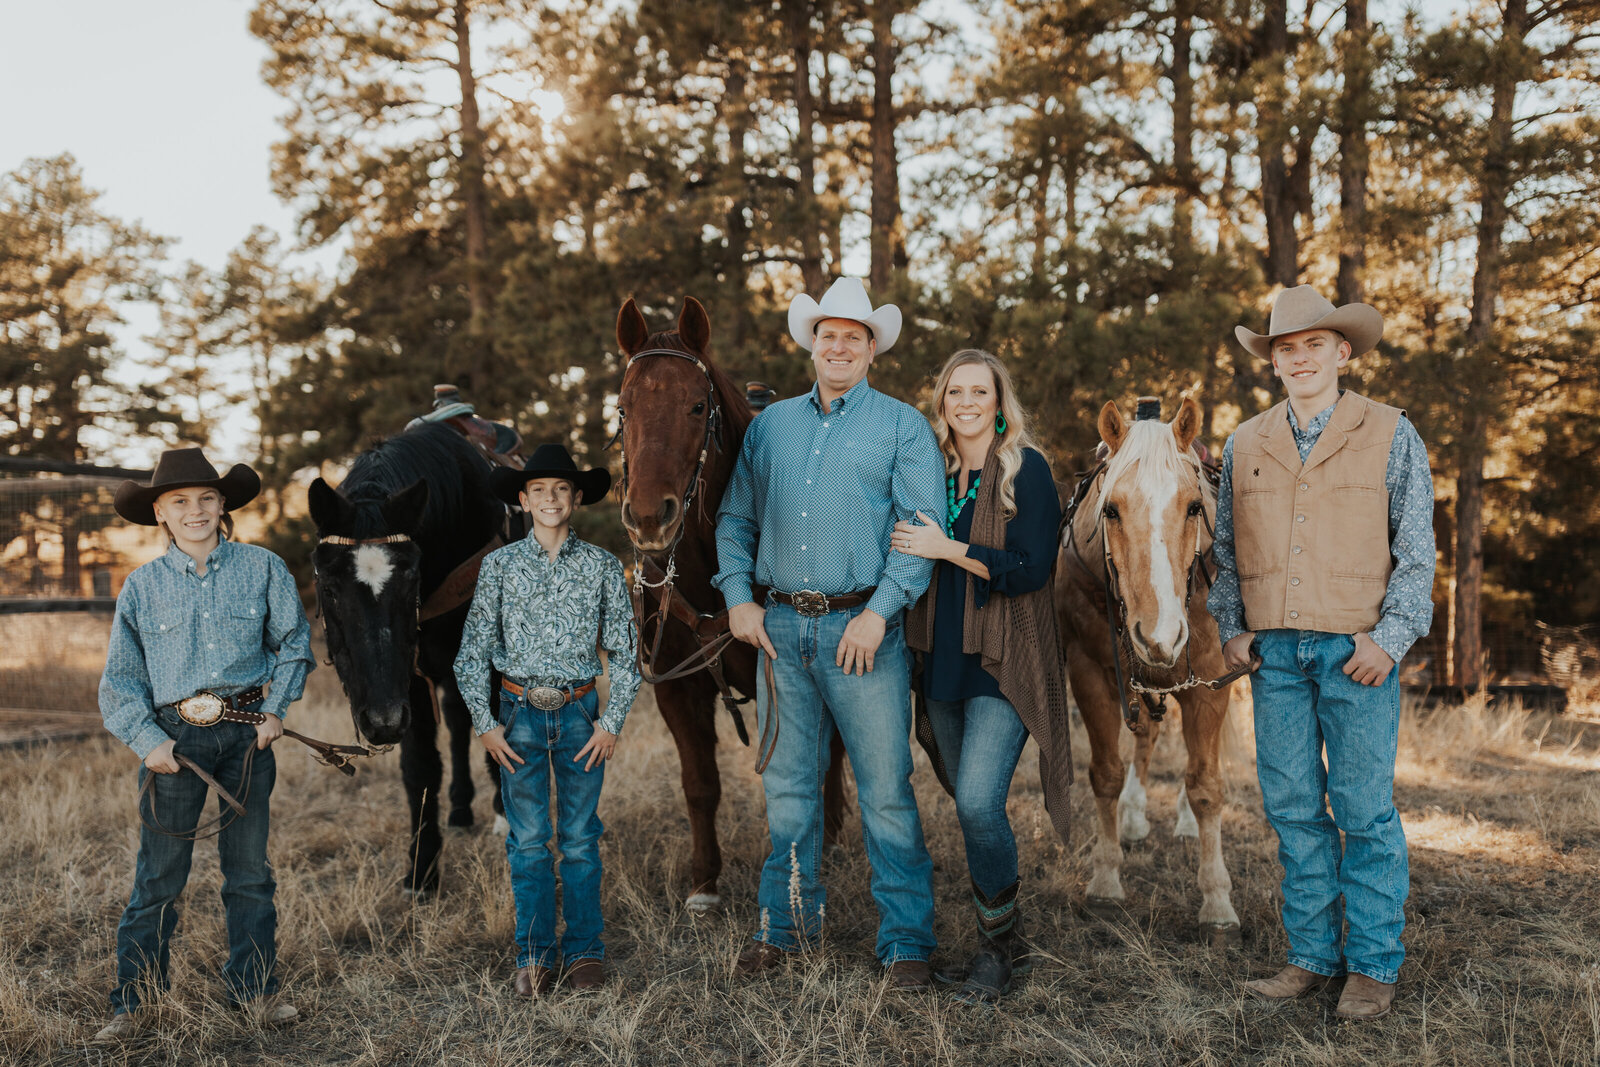 Mom, Dad, and Kids posed with their horses in families backyard